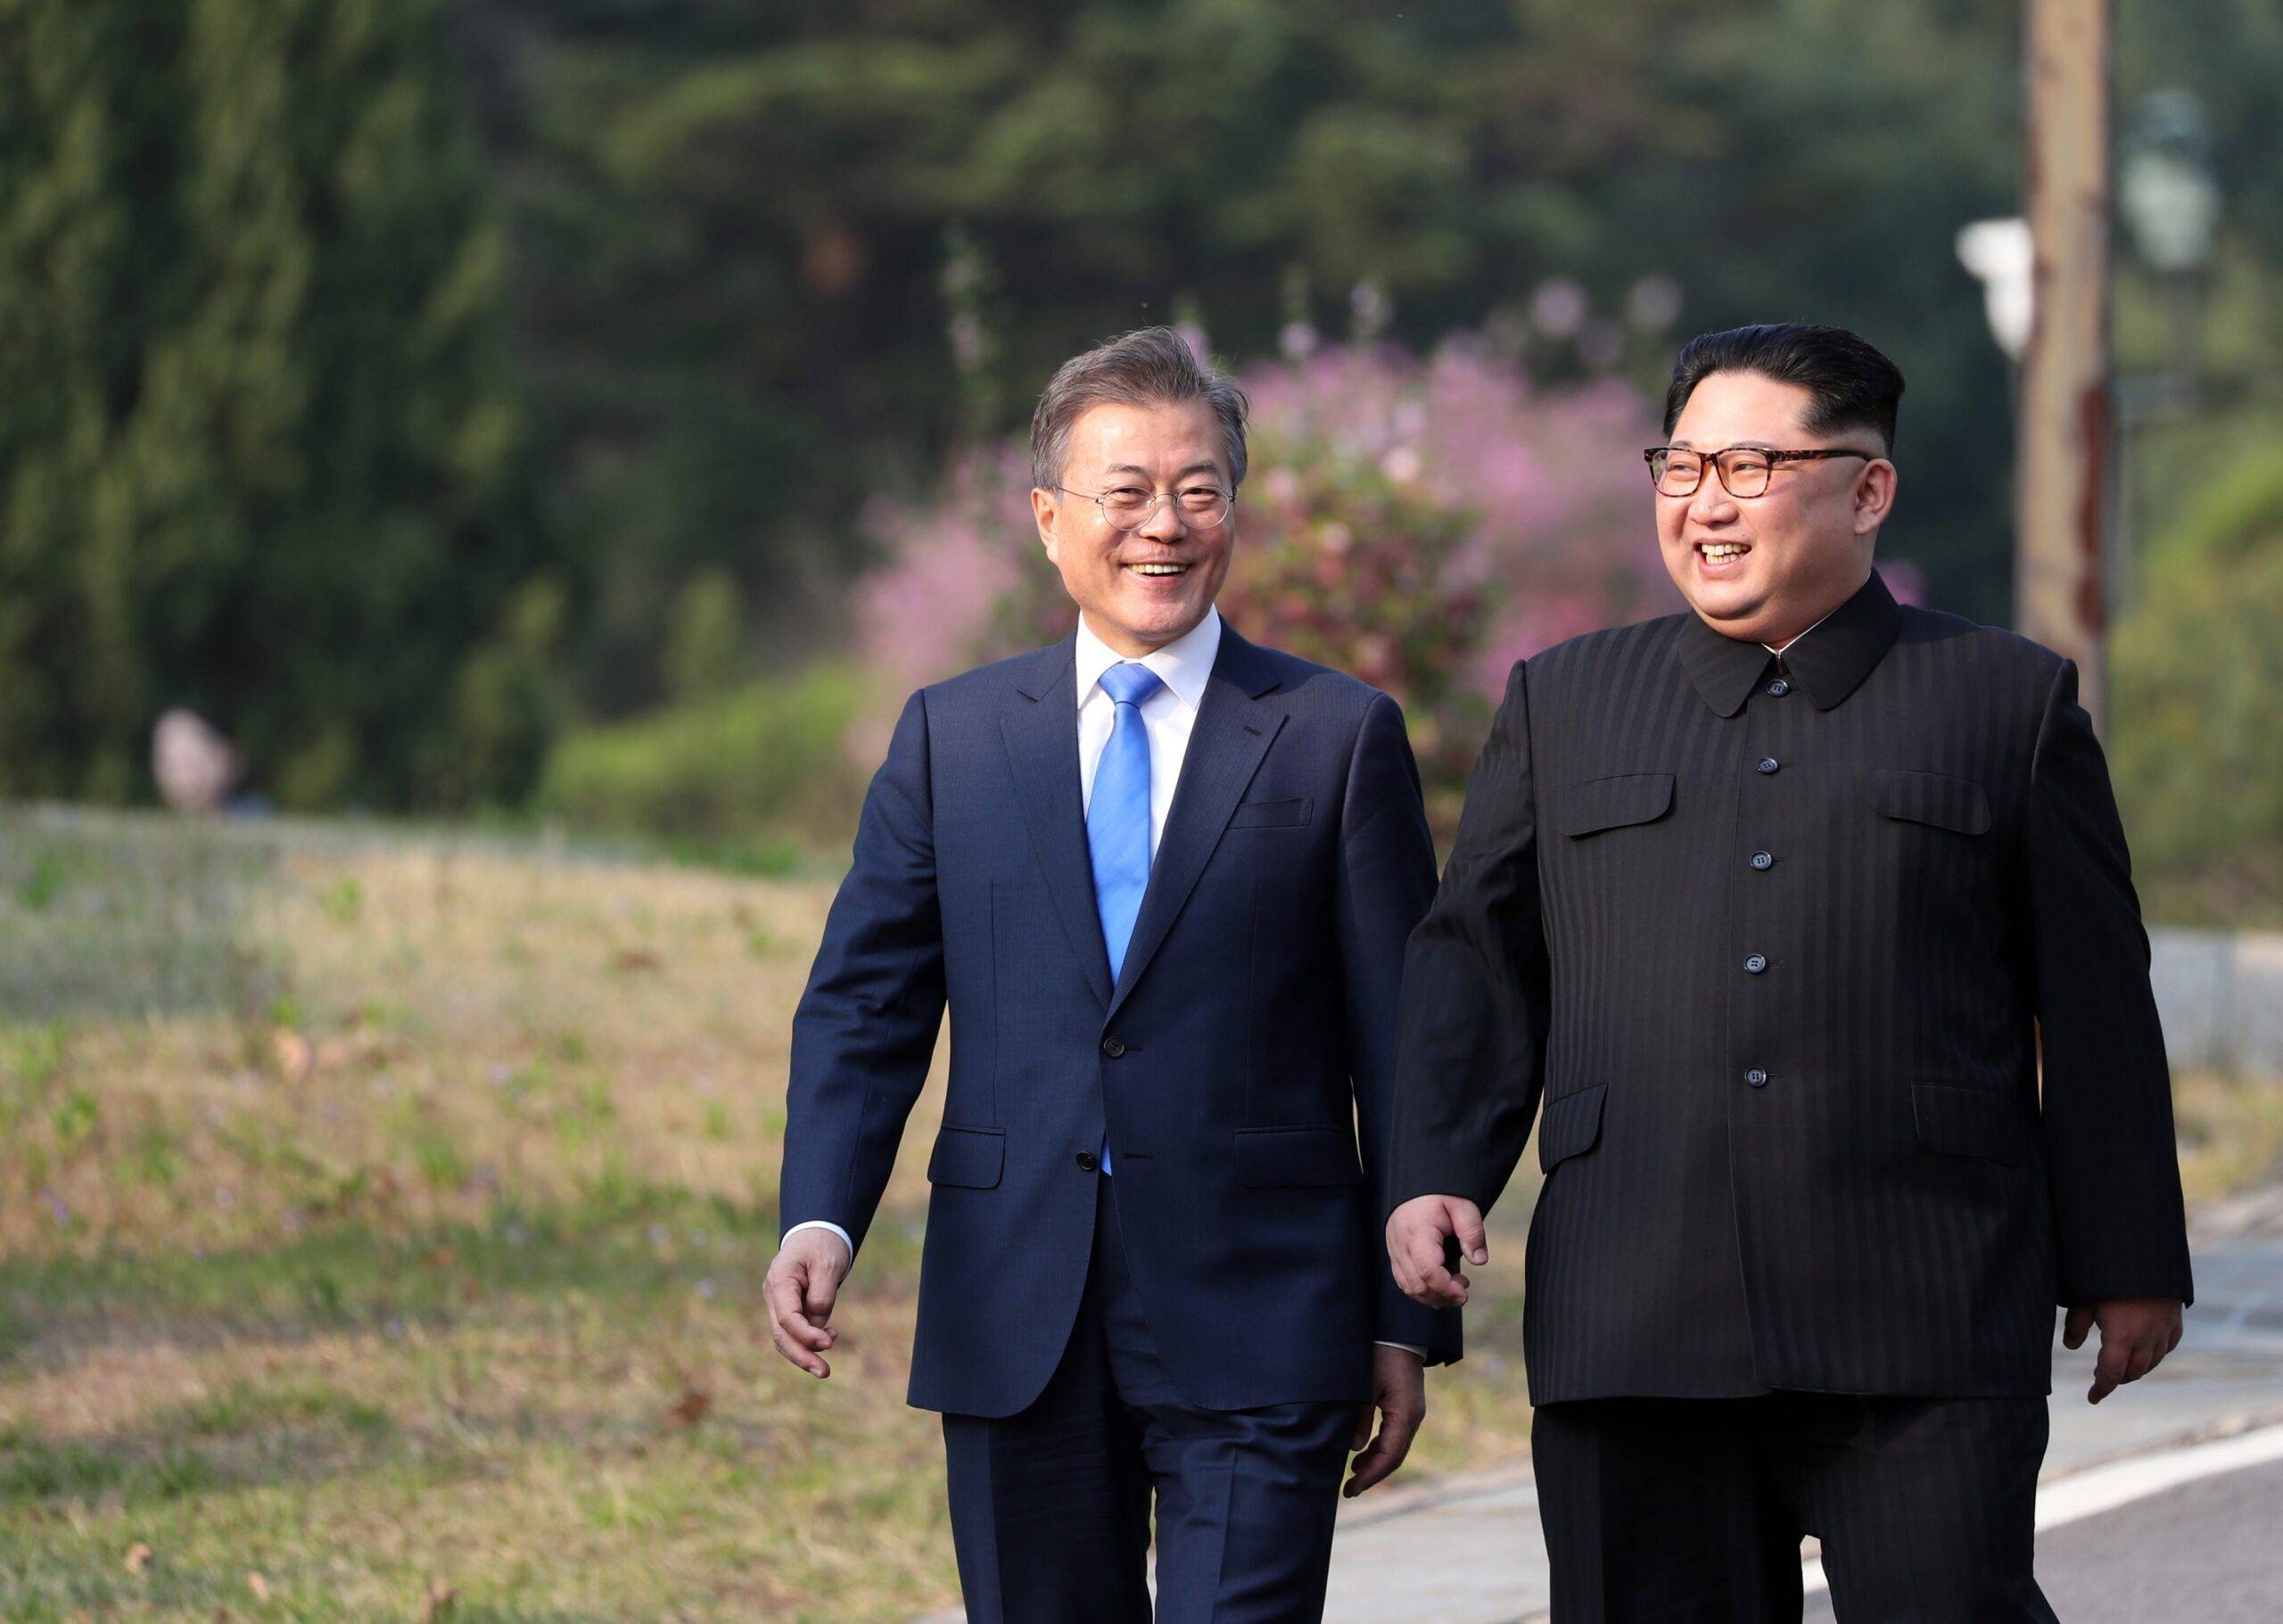 South Korean president, Moon Jae-in (L) and North Korean leader Kim Jong-un (R) take a walk after planting a commemorative tree in the Peace House building at the southern side of the truce village of Panmunjom, South Korea on 27 April, 2018 [Anadolu Agency]